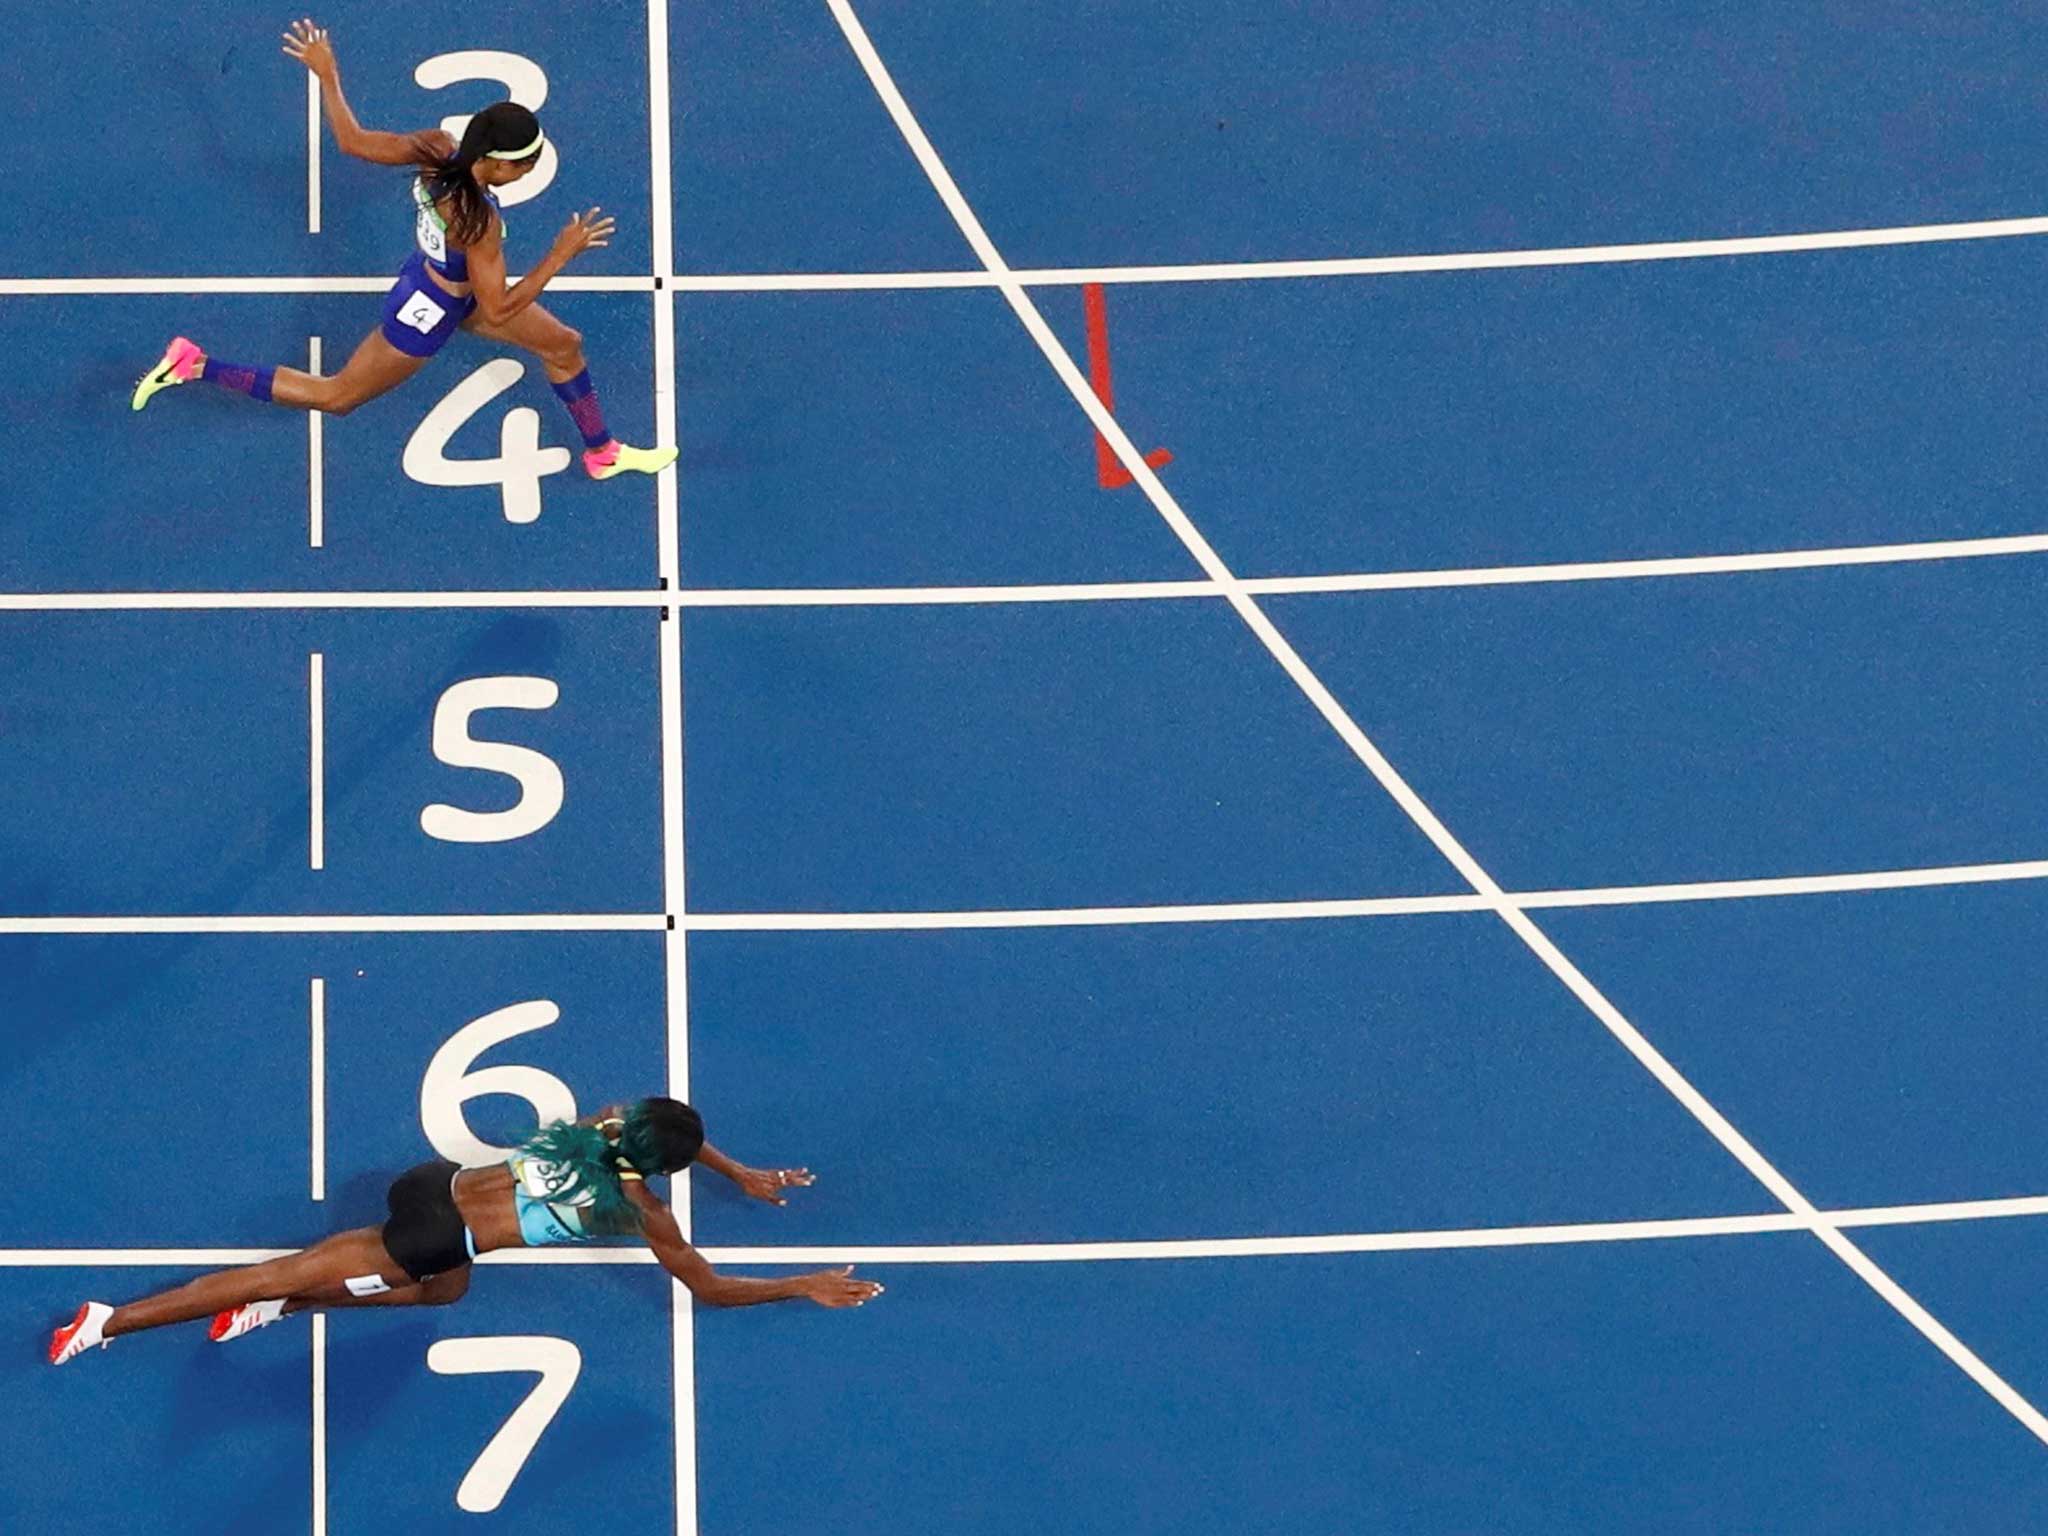 Shaunae Miller (BAH) throws herself across the finish line to win the gold ahead of Allyson Felix (USA).